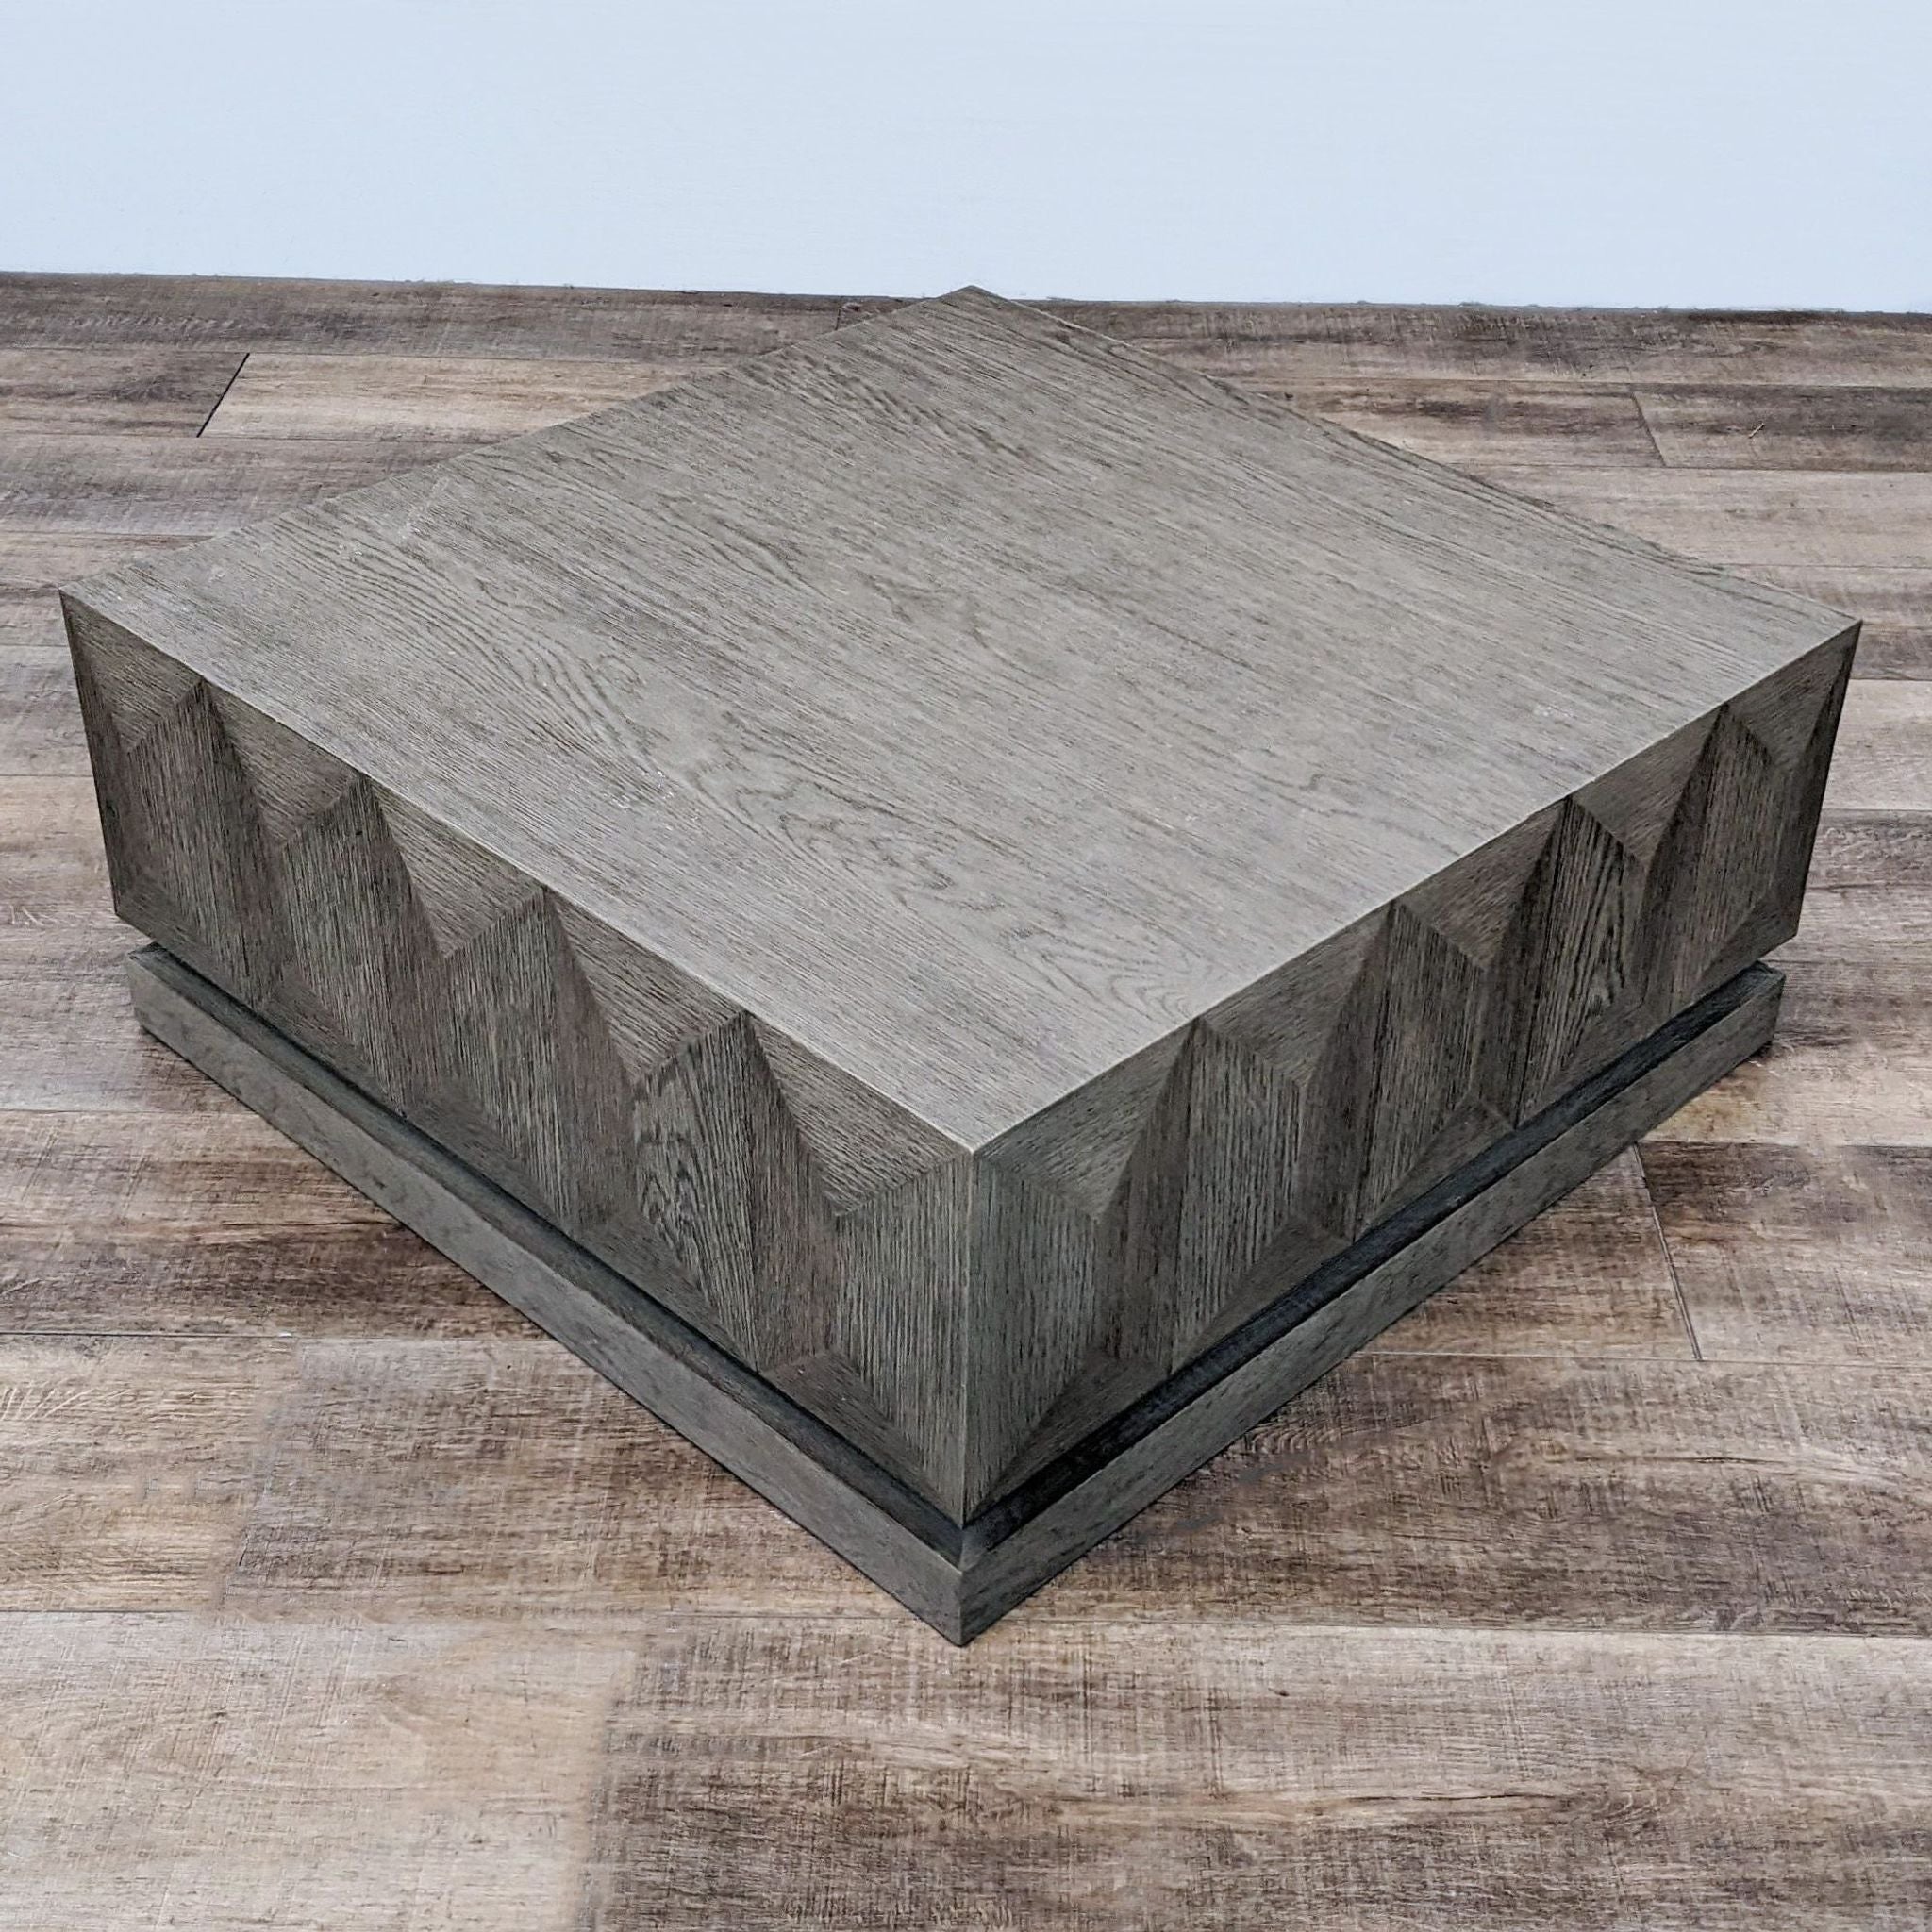 Reperch block style gray stained coffee table with geometric base design on wooden floor.